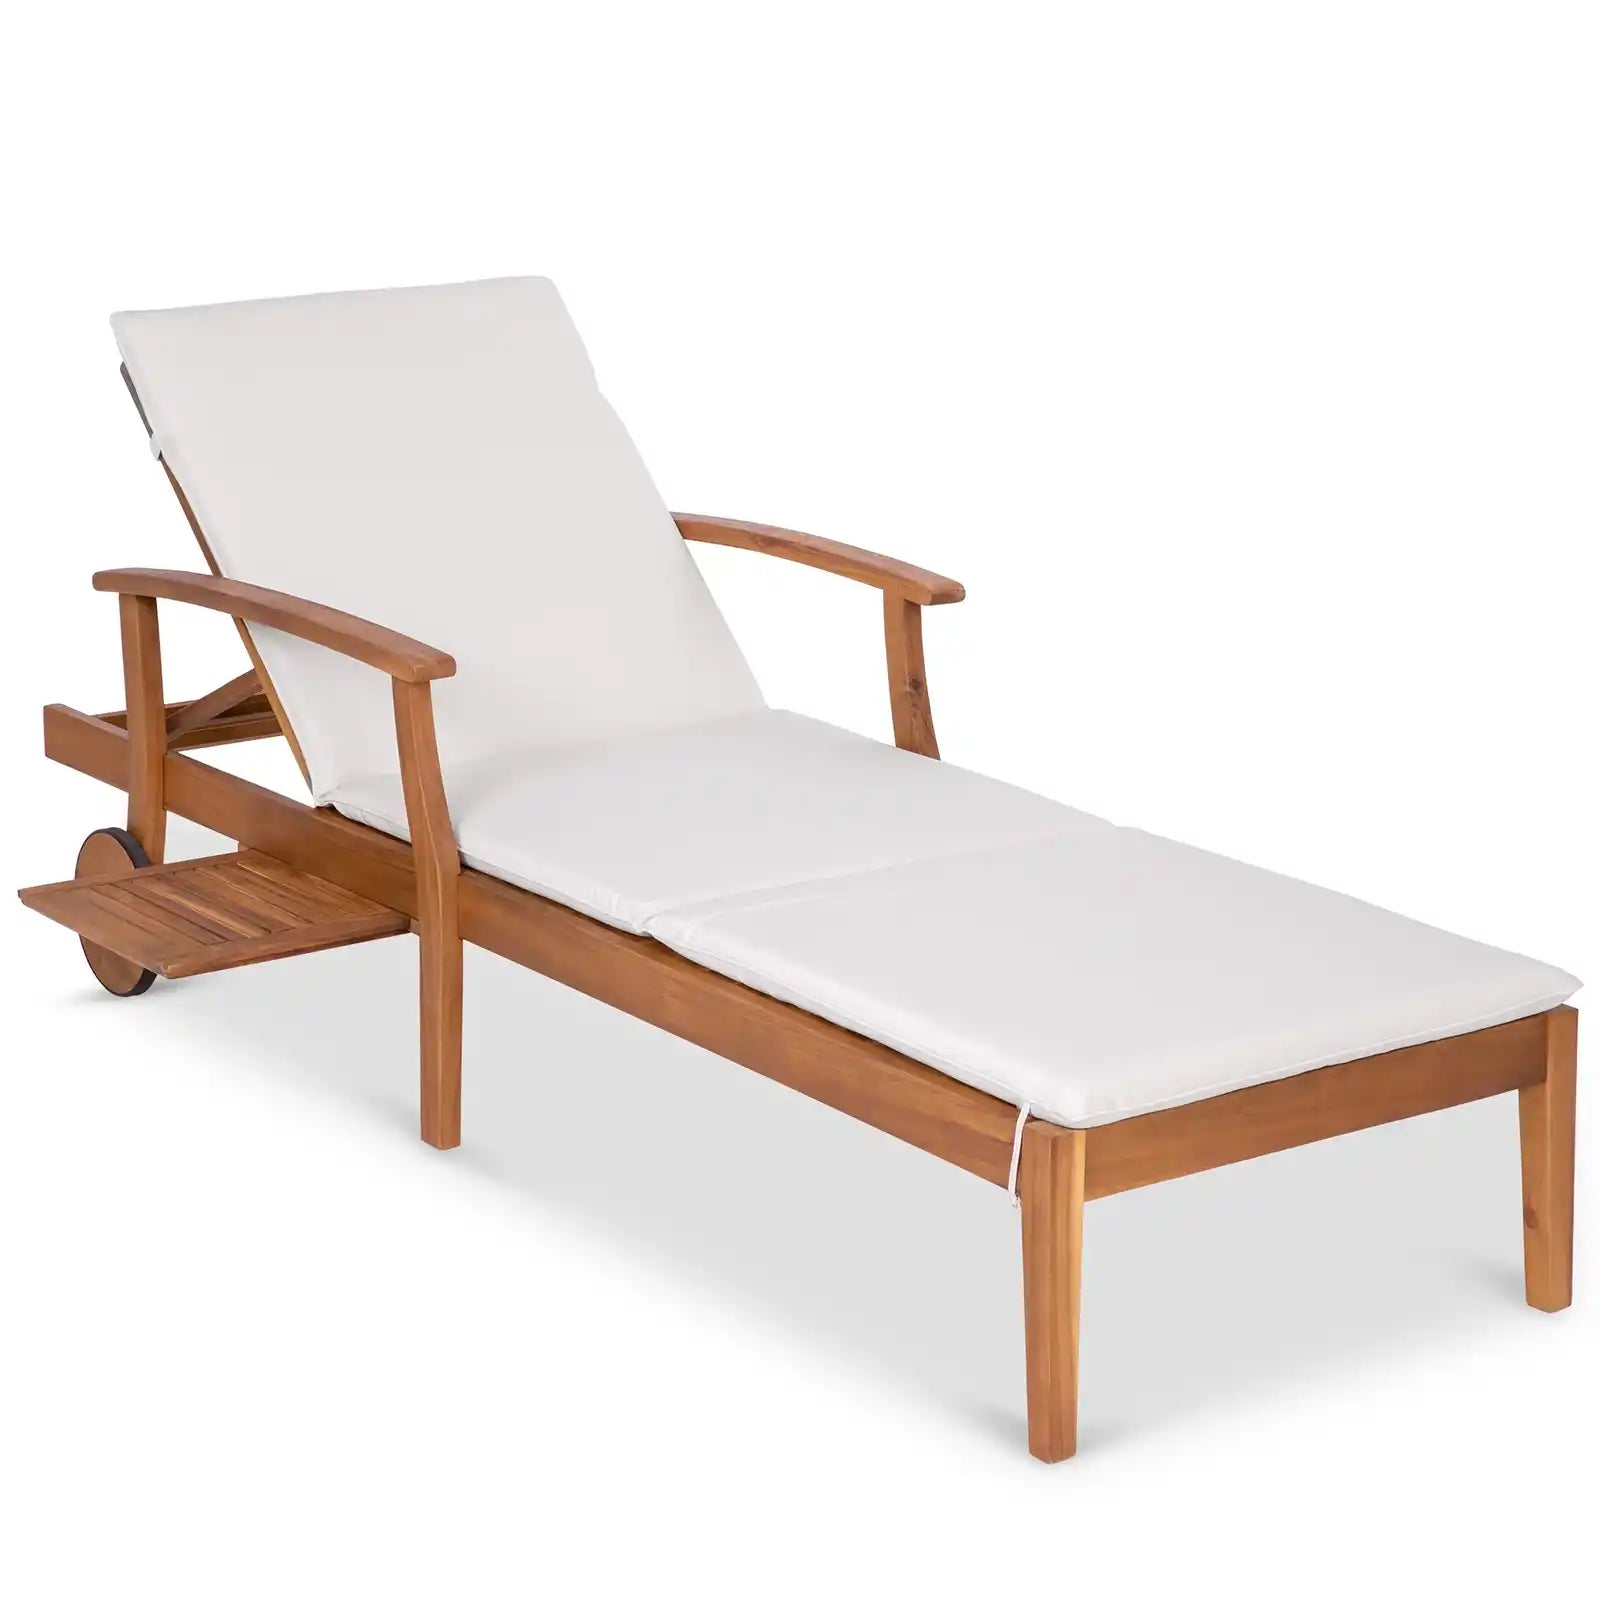 Acacia Wood Outdoor Chaise Lounge Chair w/ Adjustable Backrest, Table, Wheels